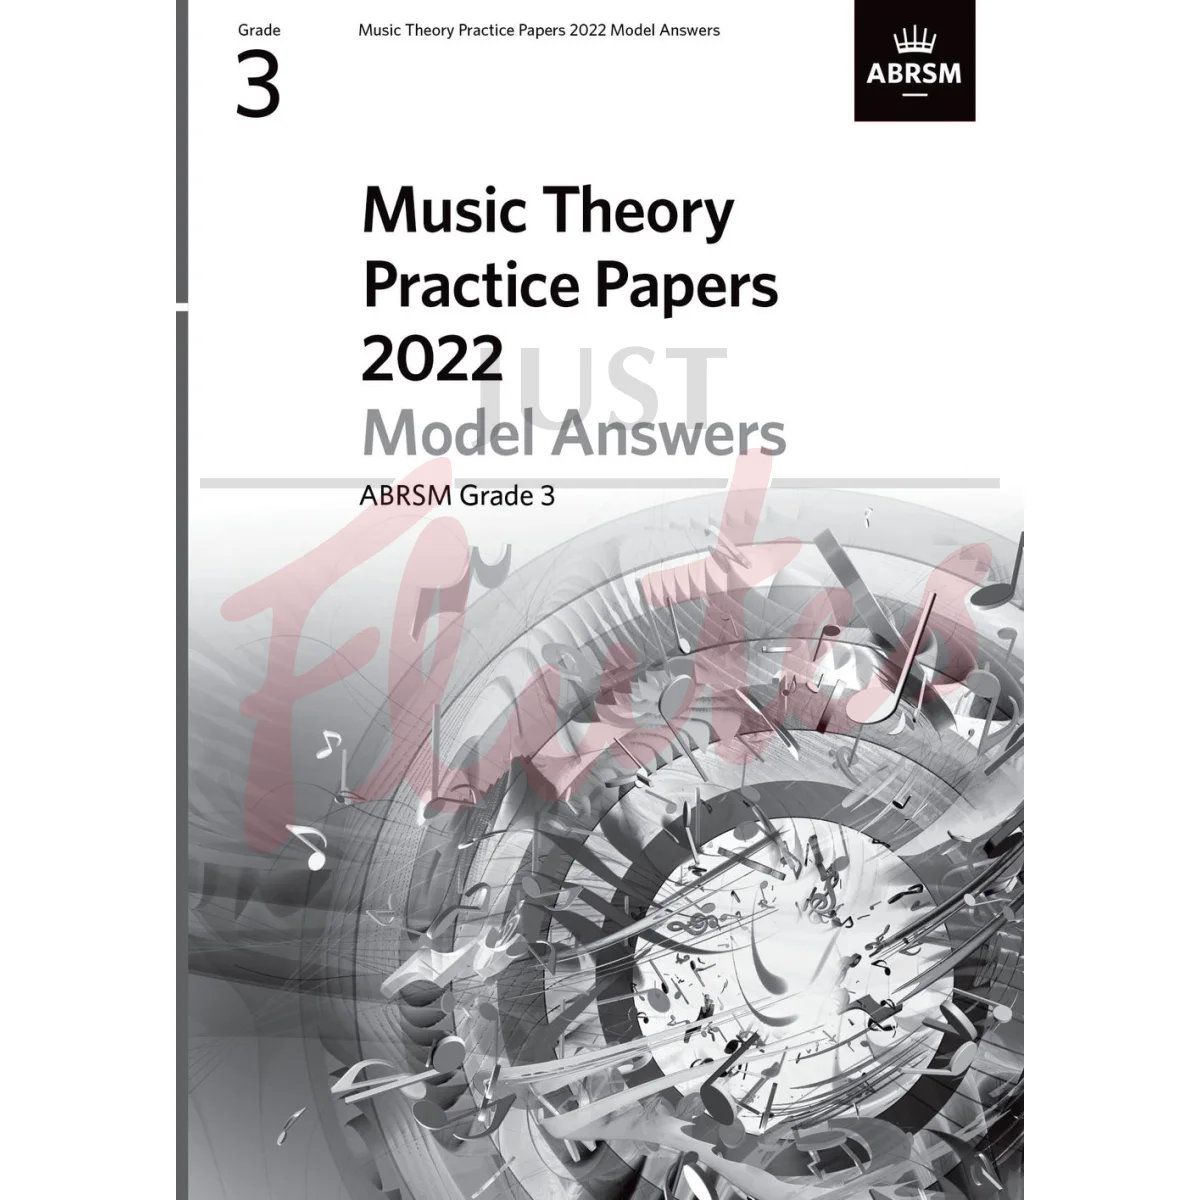 Music Theory Practice Papers 2022 Grade 3 - Model Answers